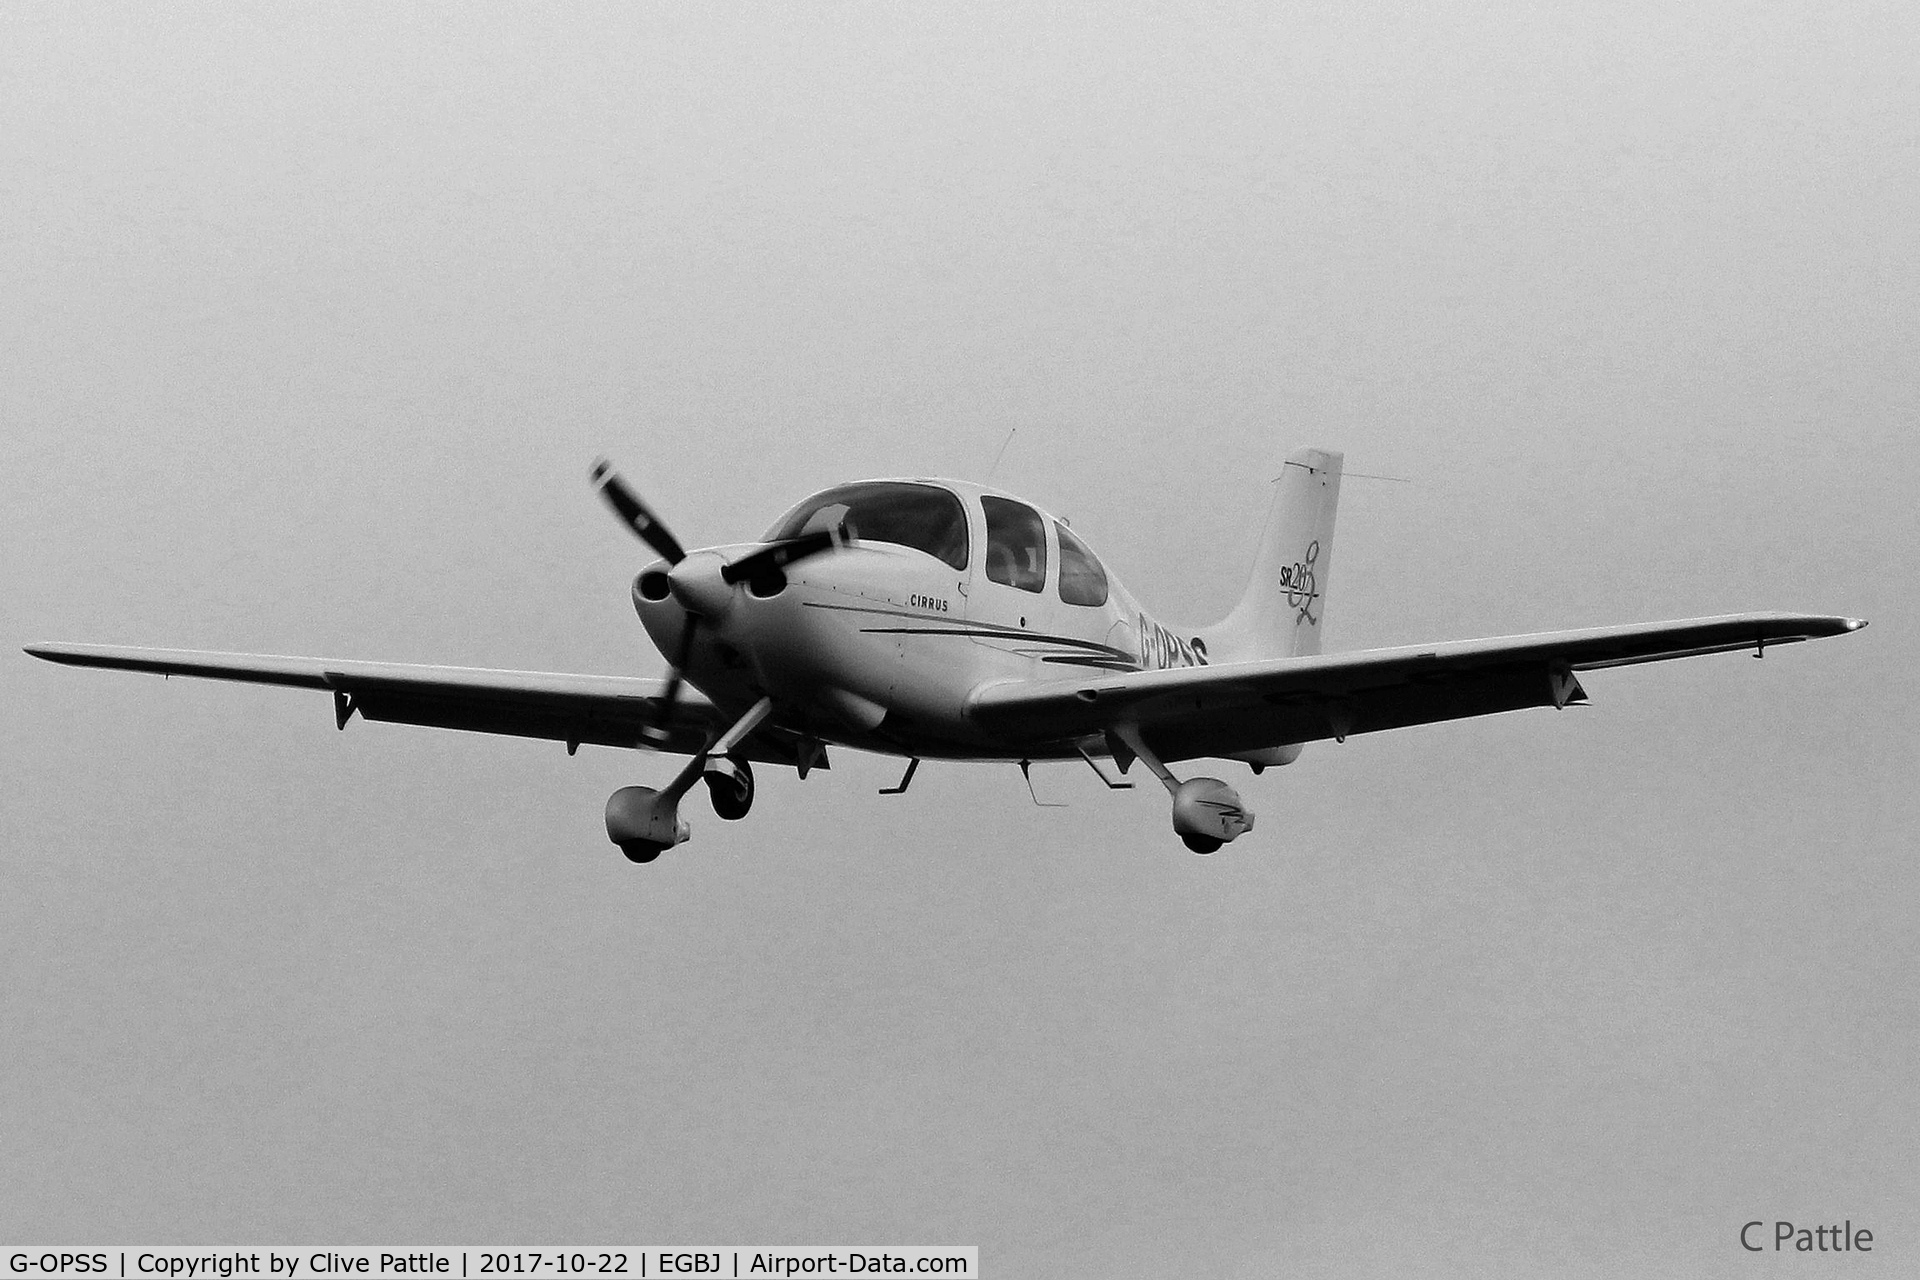 G-OPSS, 2004 Cirrus SR20 G2 C/N 1458, On finals to EGBJ